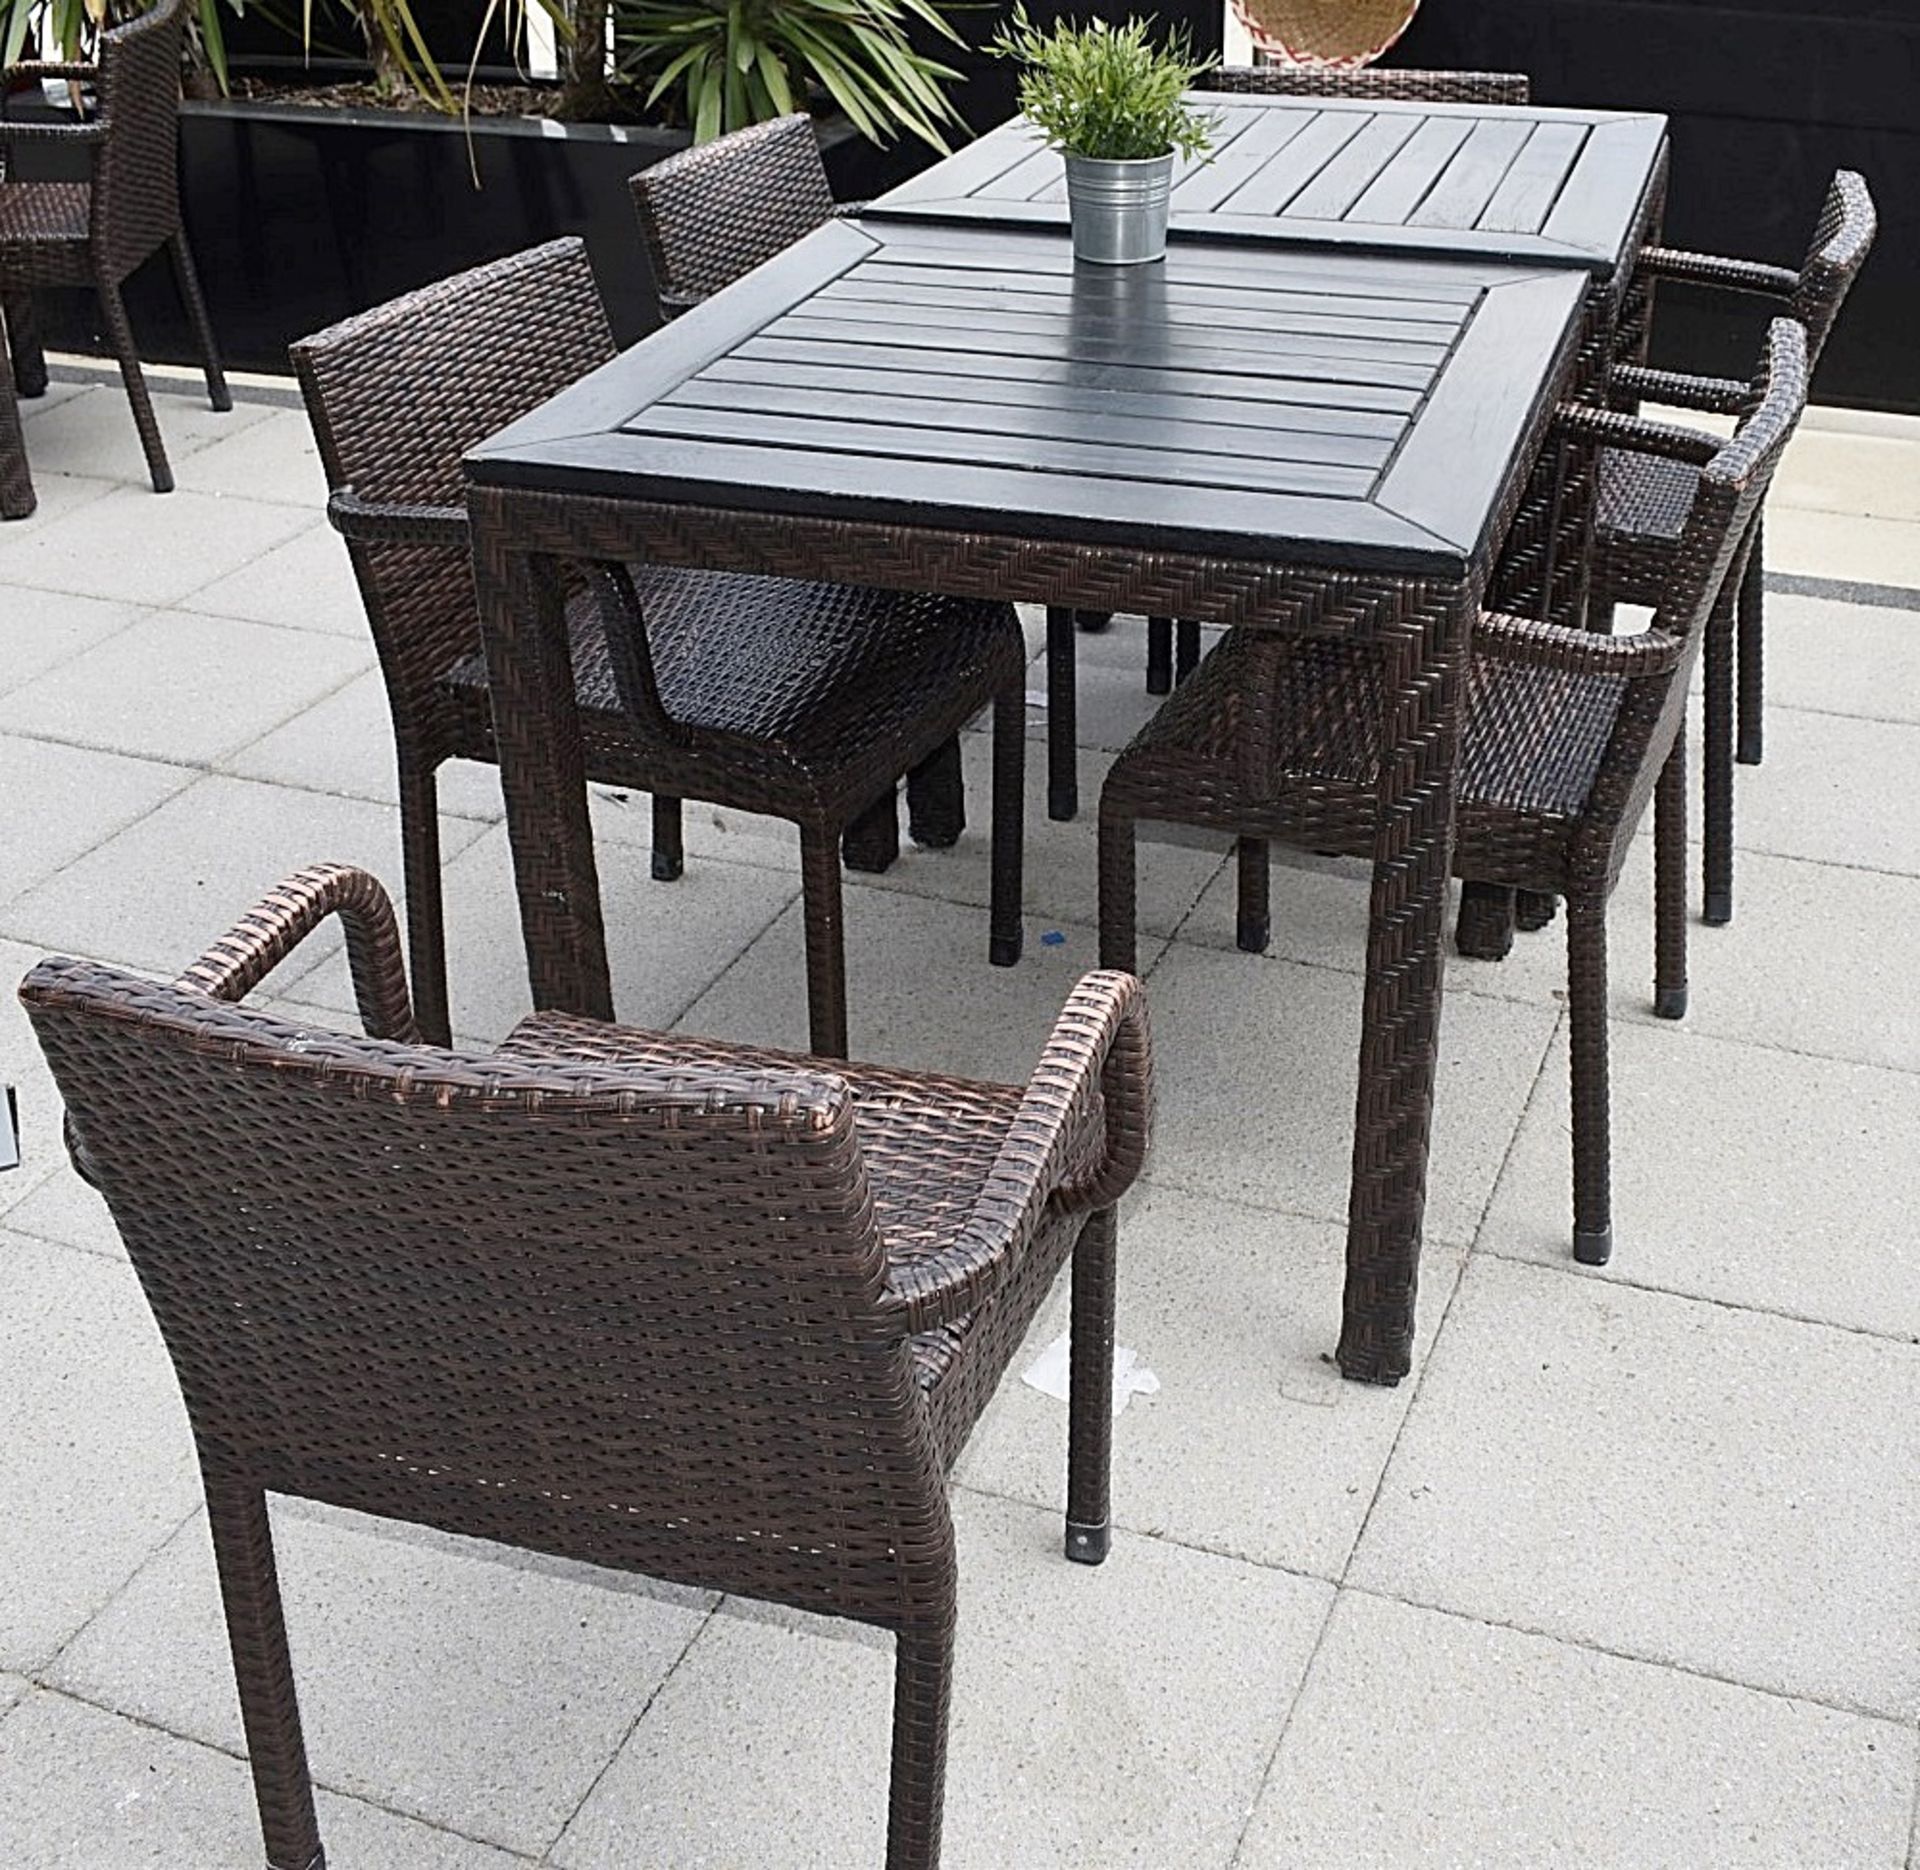 12 x Outdoor Rattan Garden Chairs With 4 Matching Square Tables - Ref: CB OS - CL420 - From a